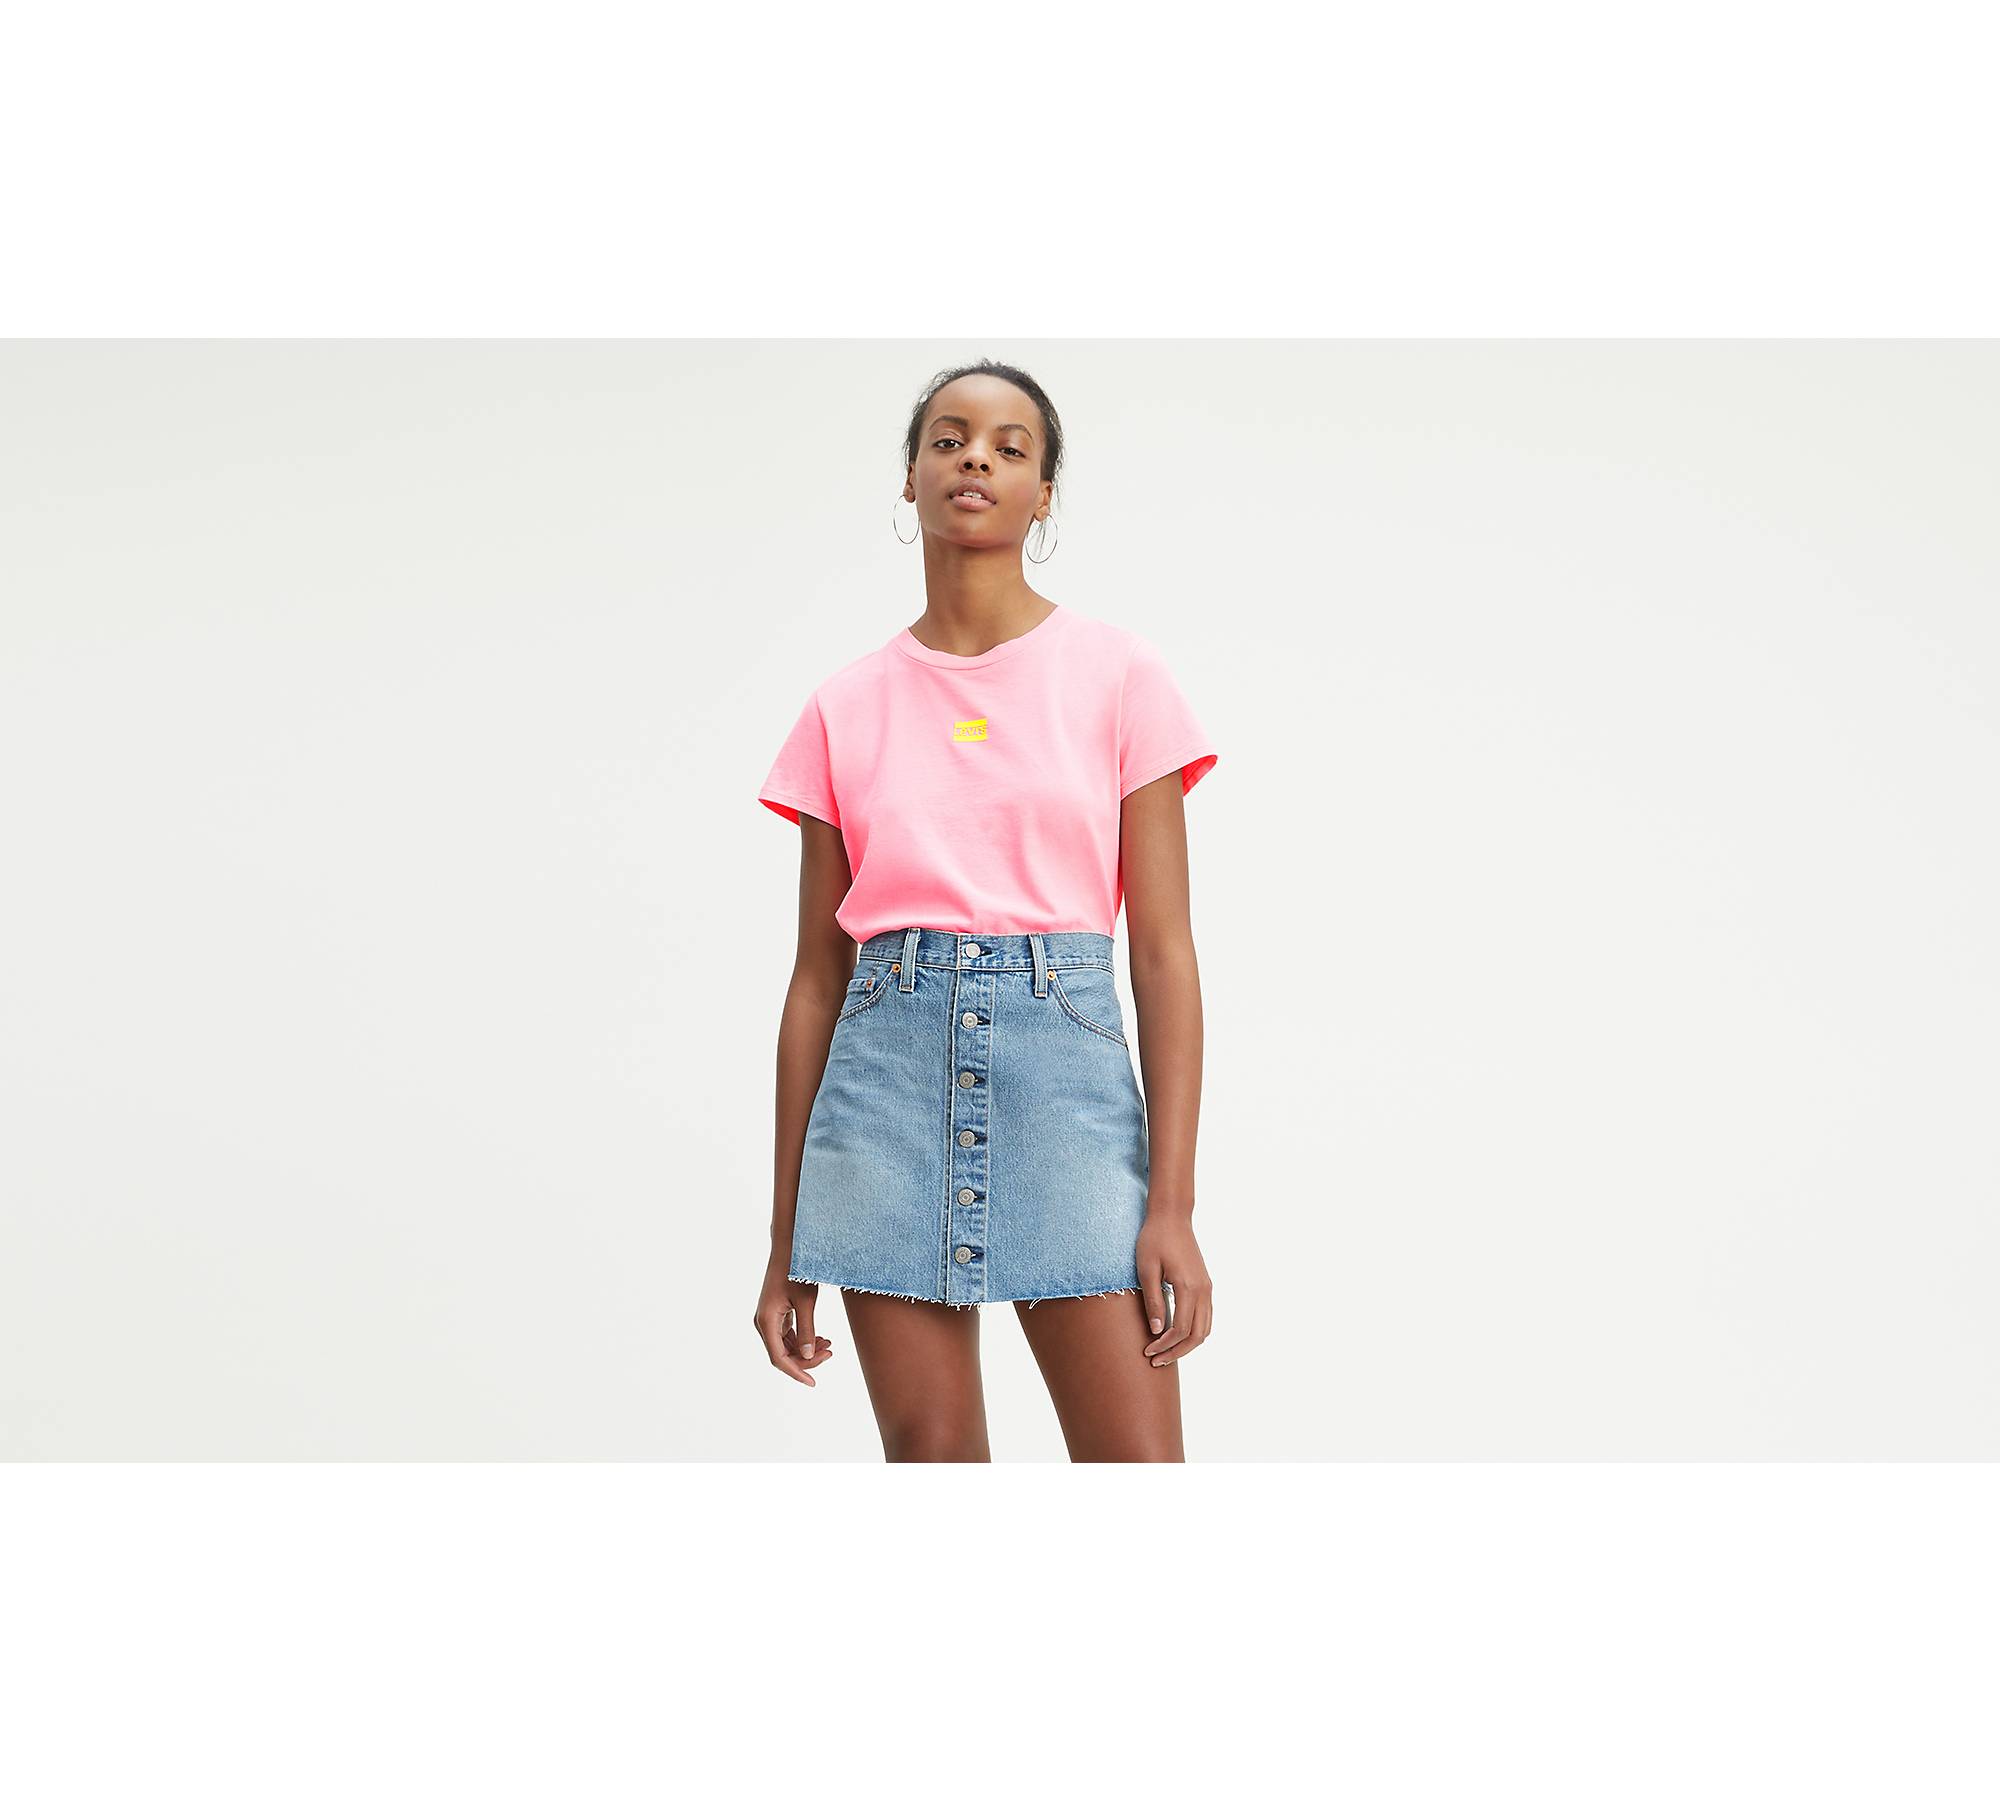 Graphic Cropped Neon Tee Shirt 1